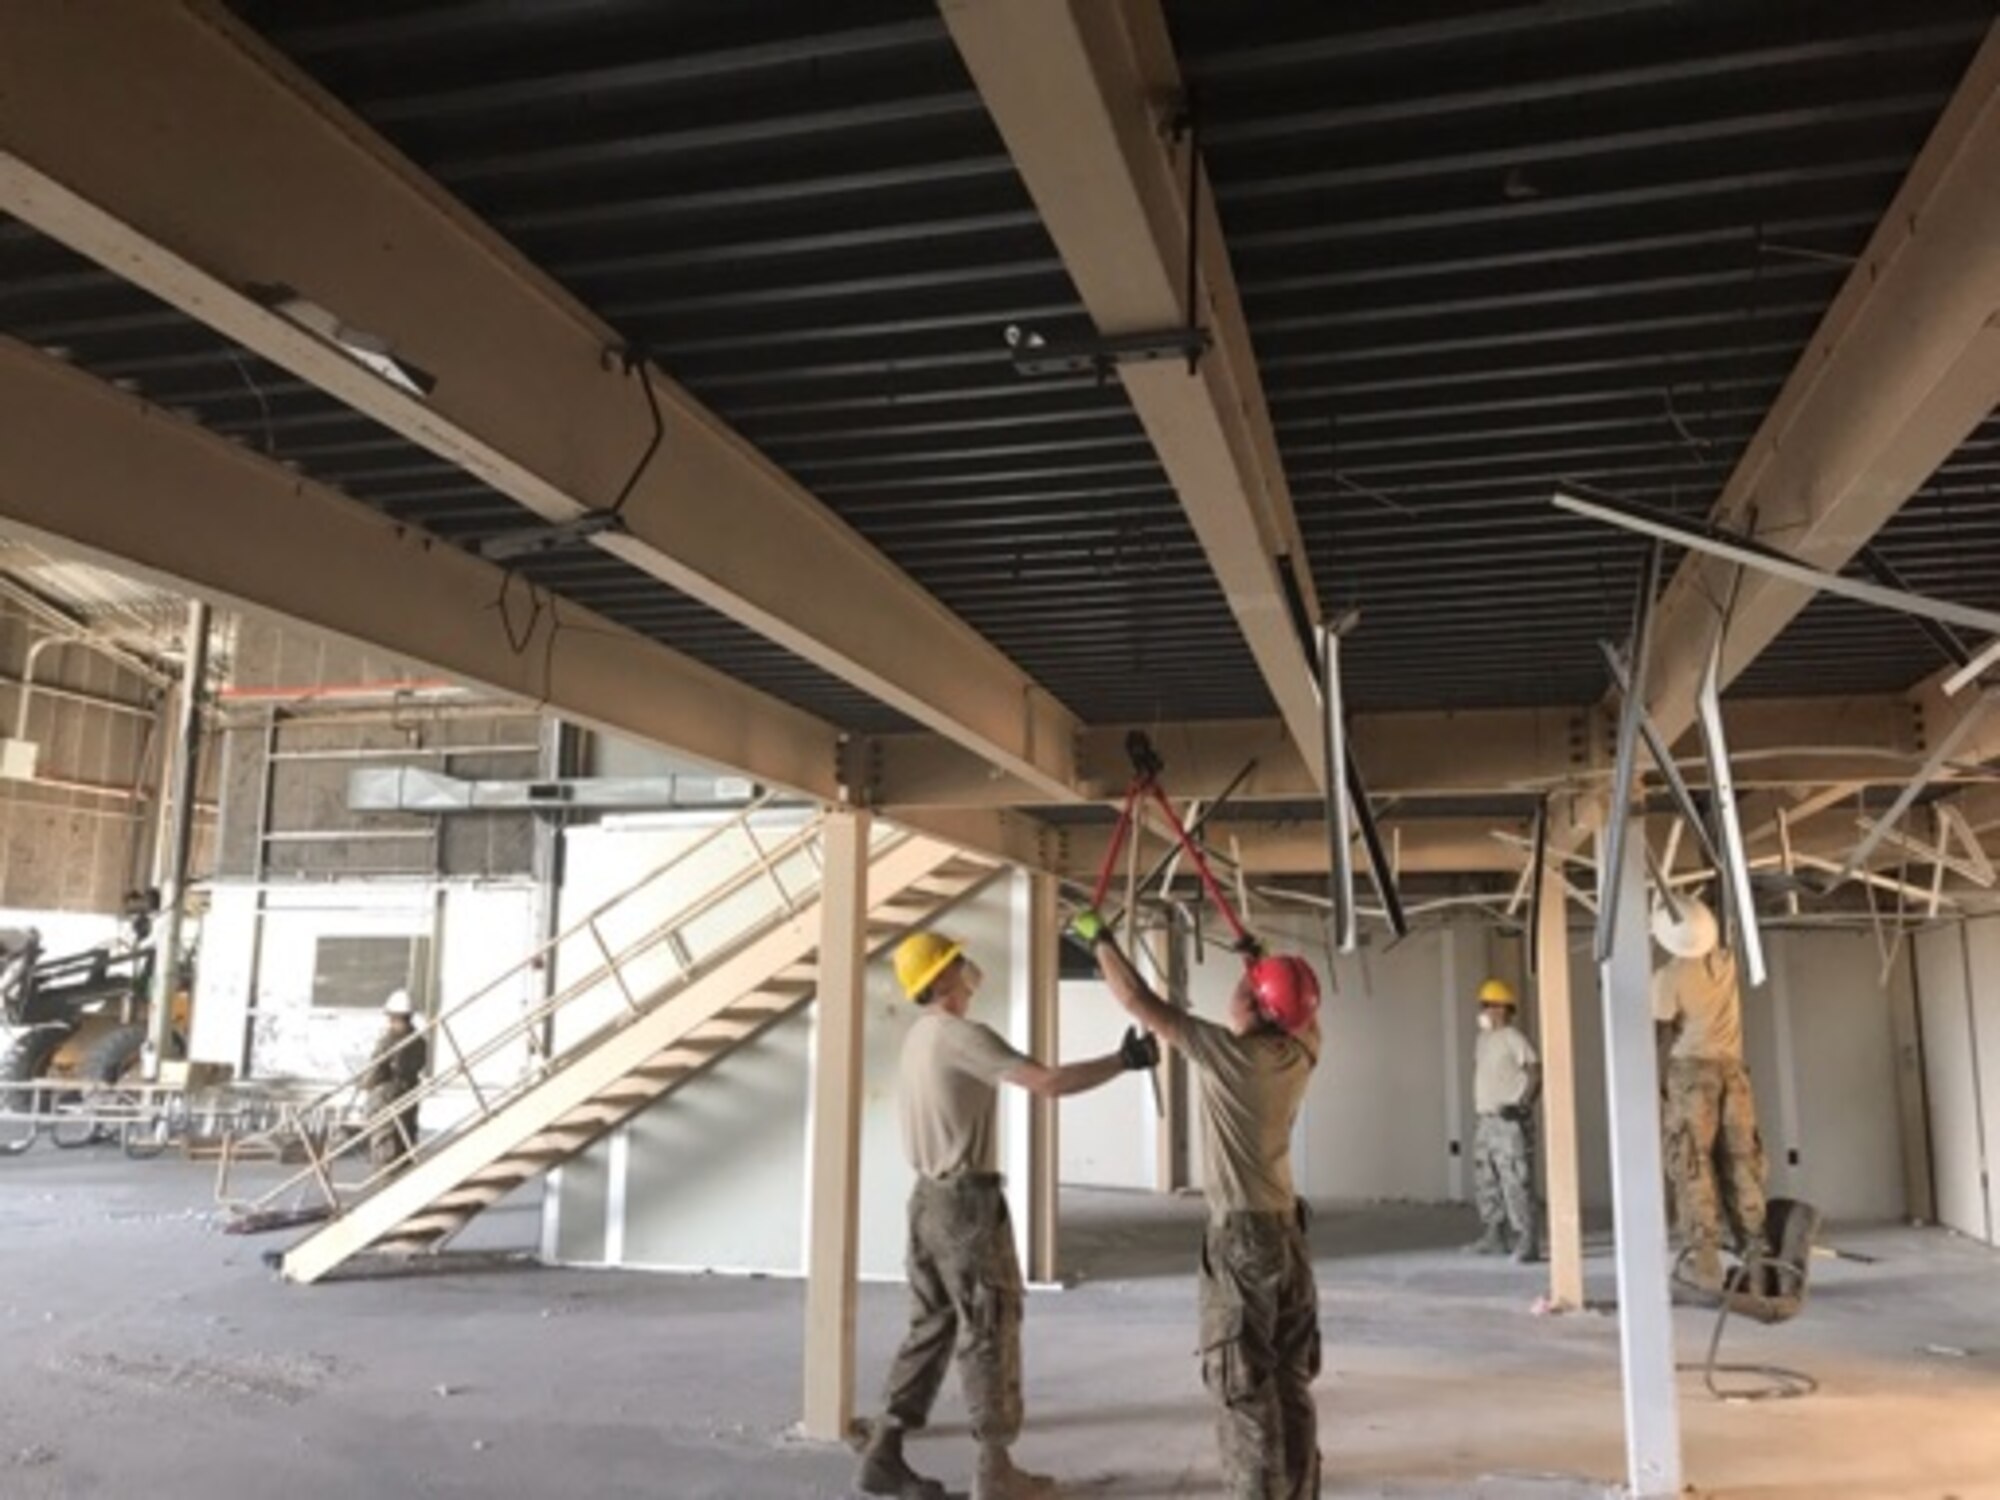 Crews from the 60th Civil Engineer Squadron structures shop dismantle old mobile offices inside Building 844 at Travis Air Force Base, California, July 2, 2019. The refurbished hangar houses the new Nose Dock Gym, facilitated through existing base funds, equipment donations and volunteer work by the 60th Mission Support Group. (U.S. Air Force courtesy photo)